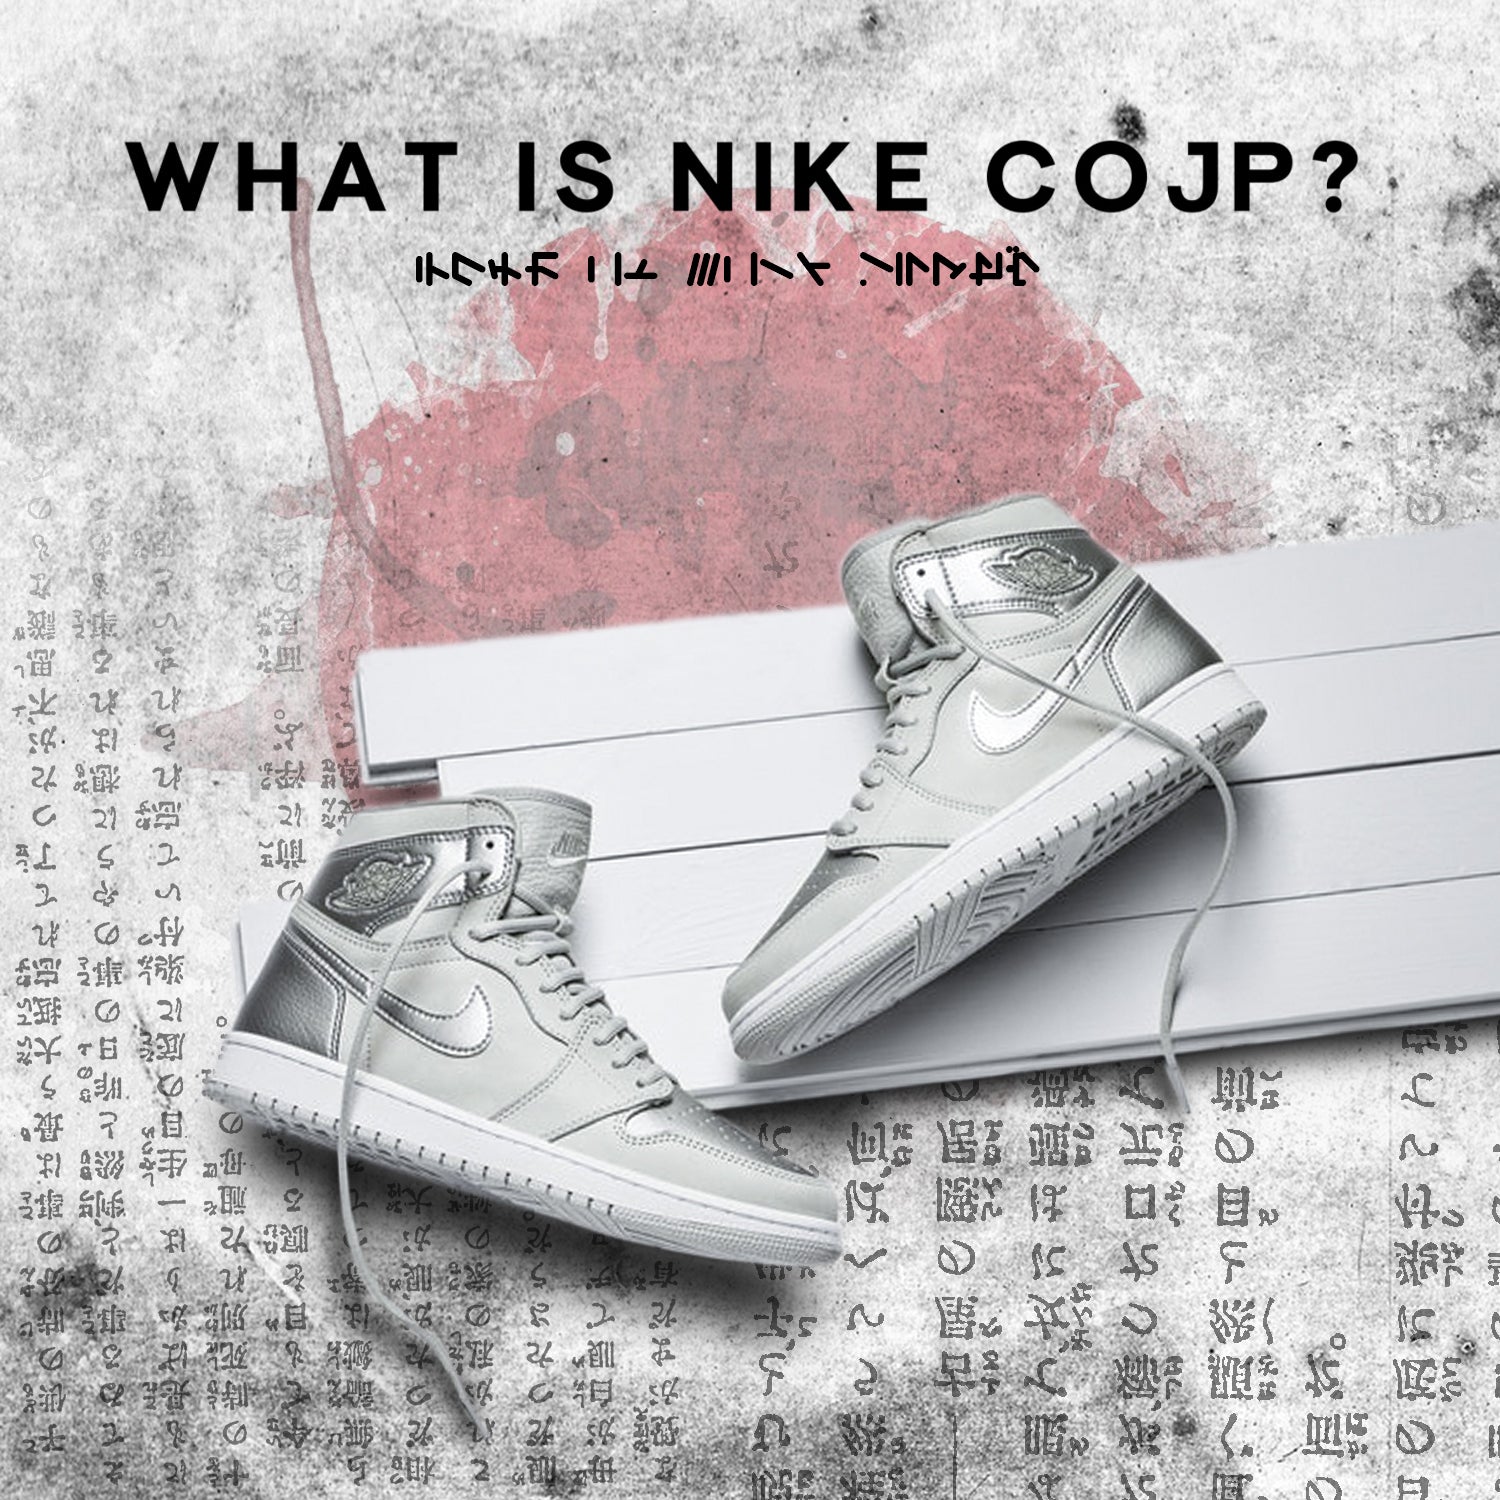 Nike Archives: The CO.JP Project.